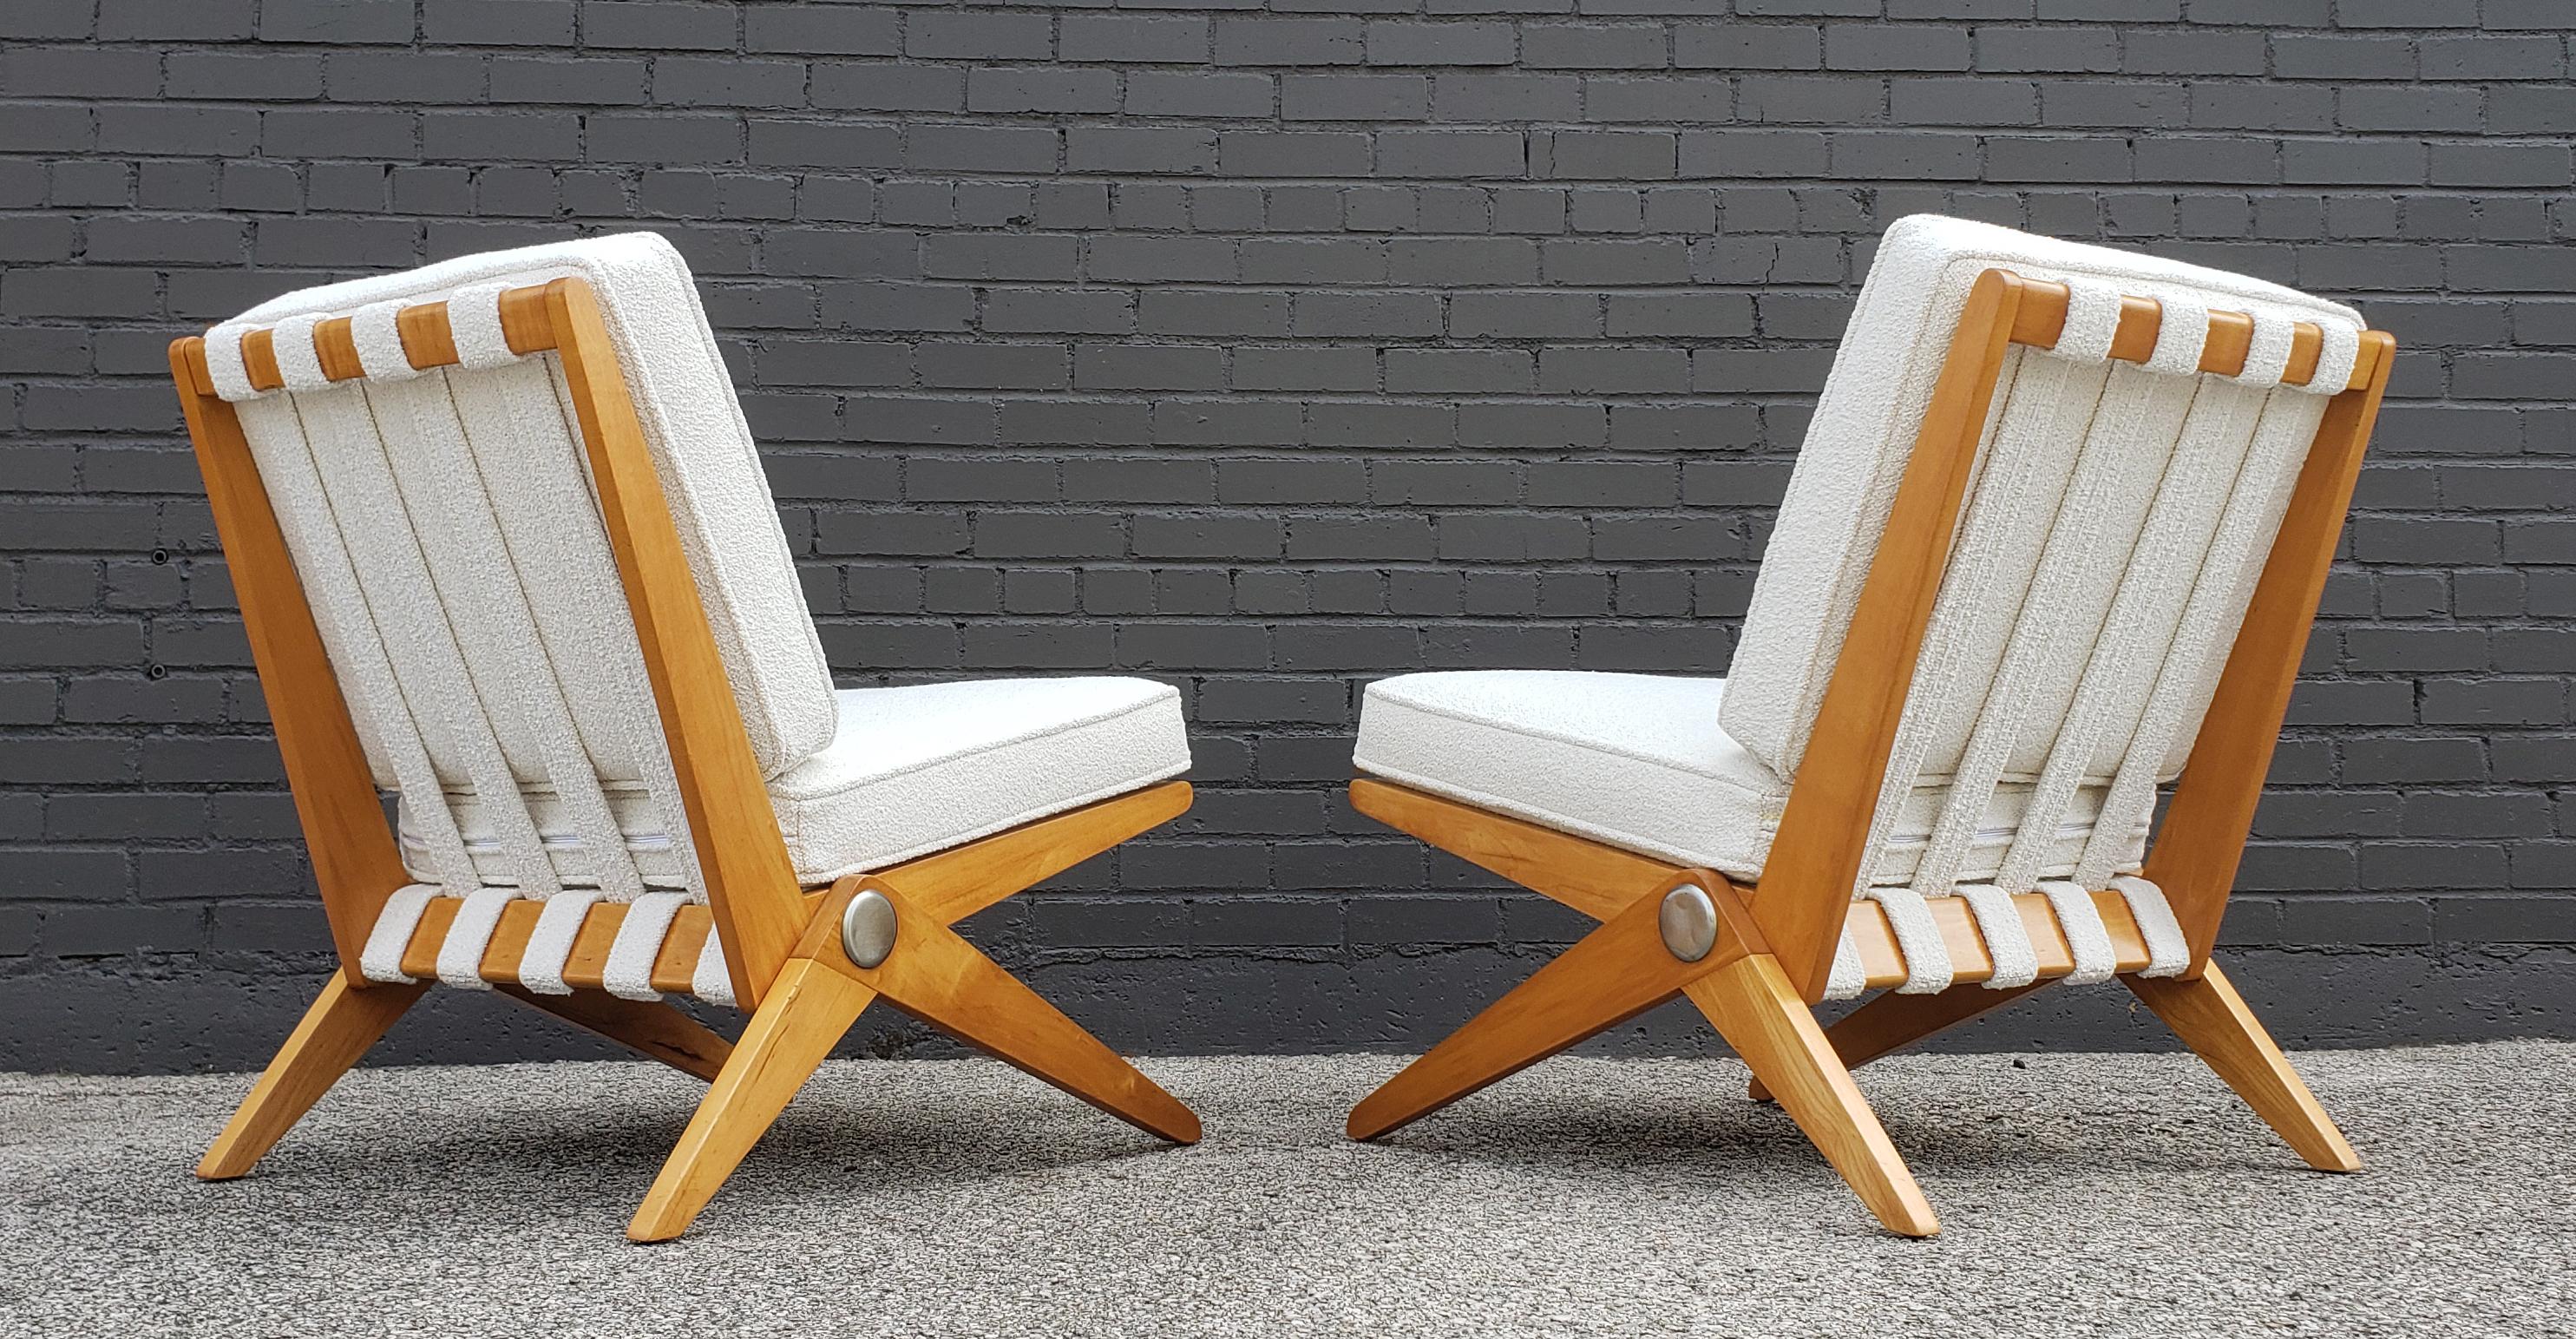 Rare and early pair of Scissor Lounge chairs designed by Pierre Jeanneret in 1948 and produced by Knoll and Associates, circa 1955. The frames have been disassembled and re-glued and re-trued for structural integrity. Fully refinished in a